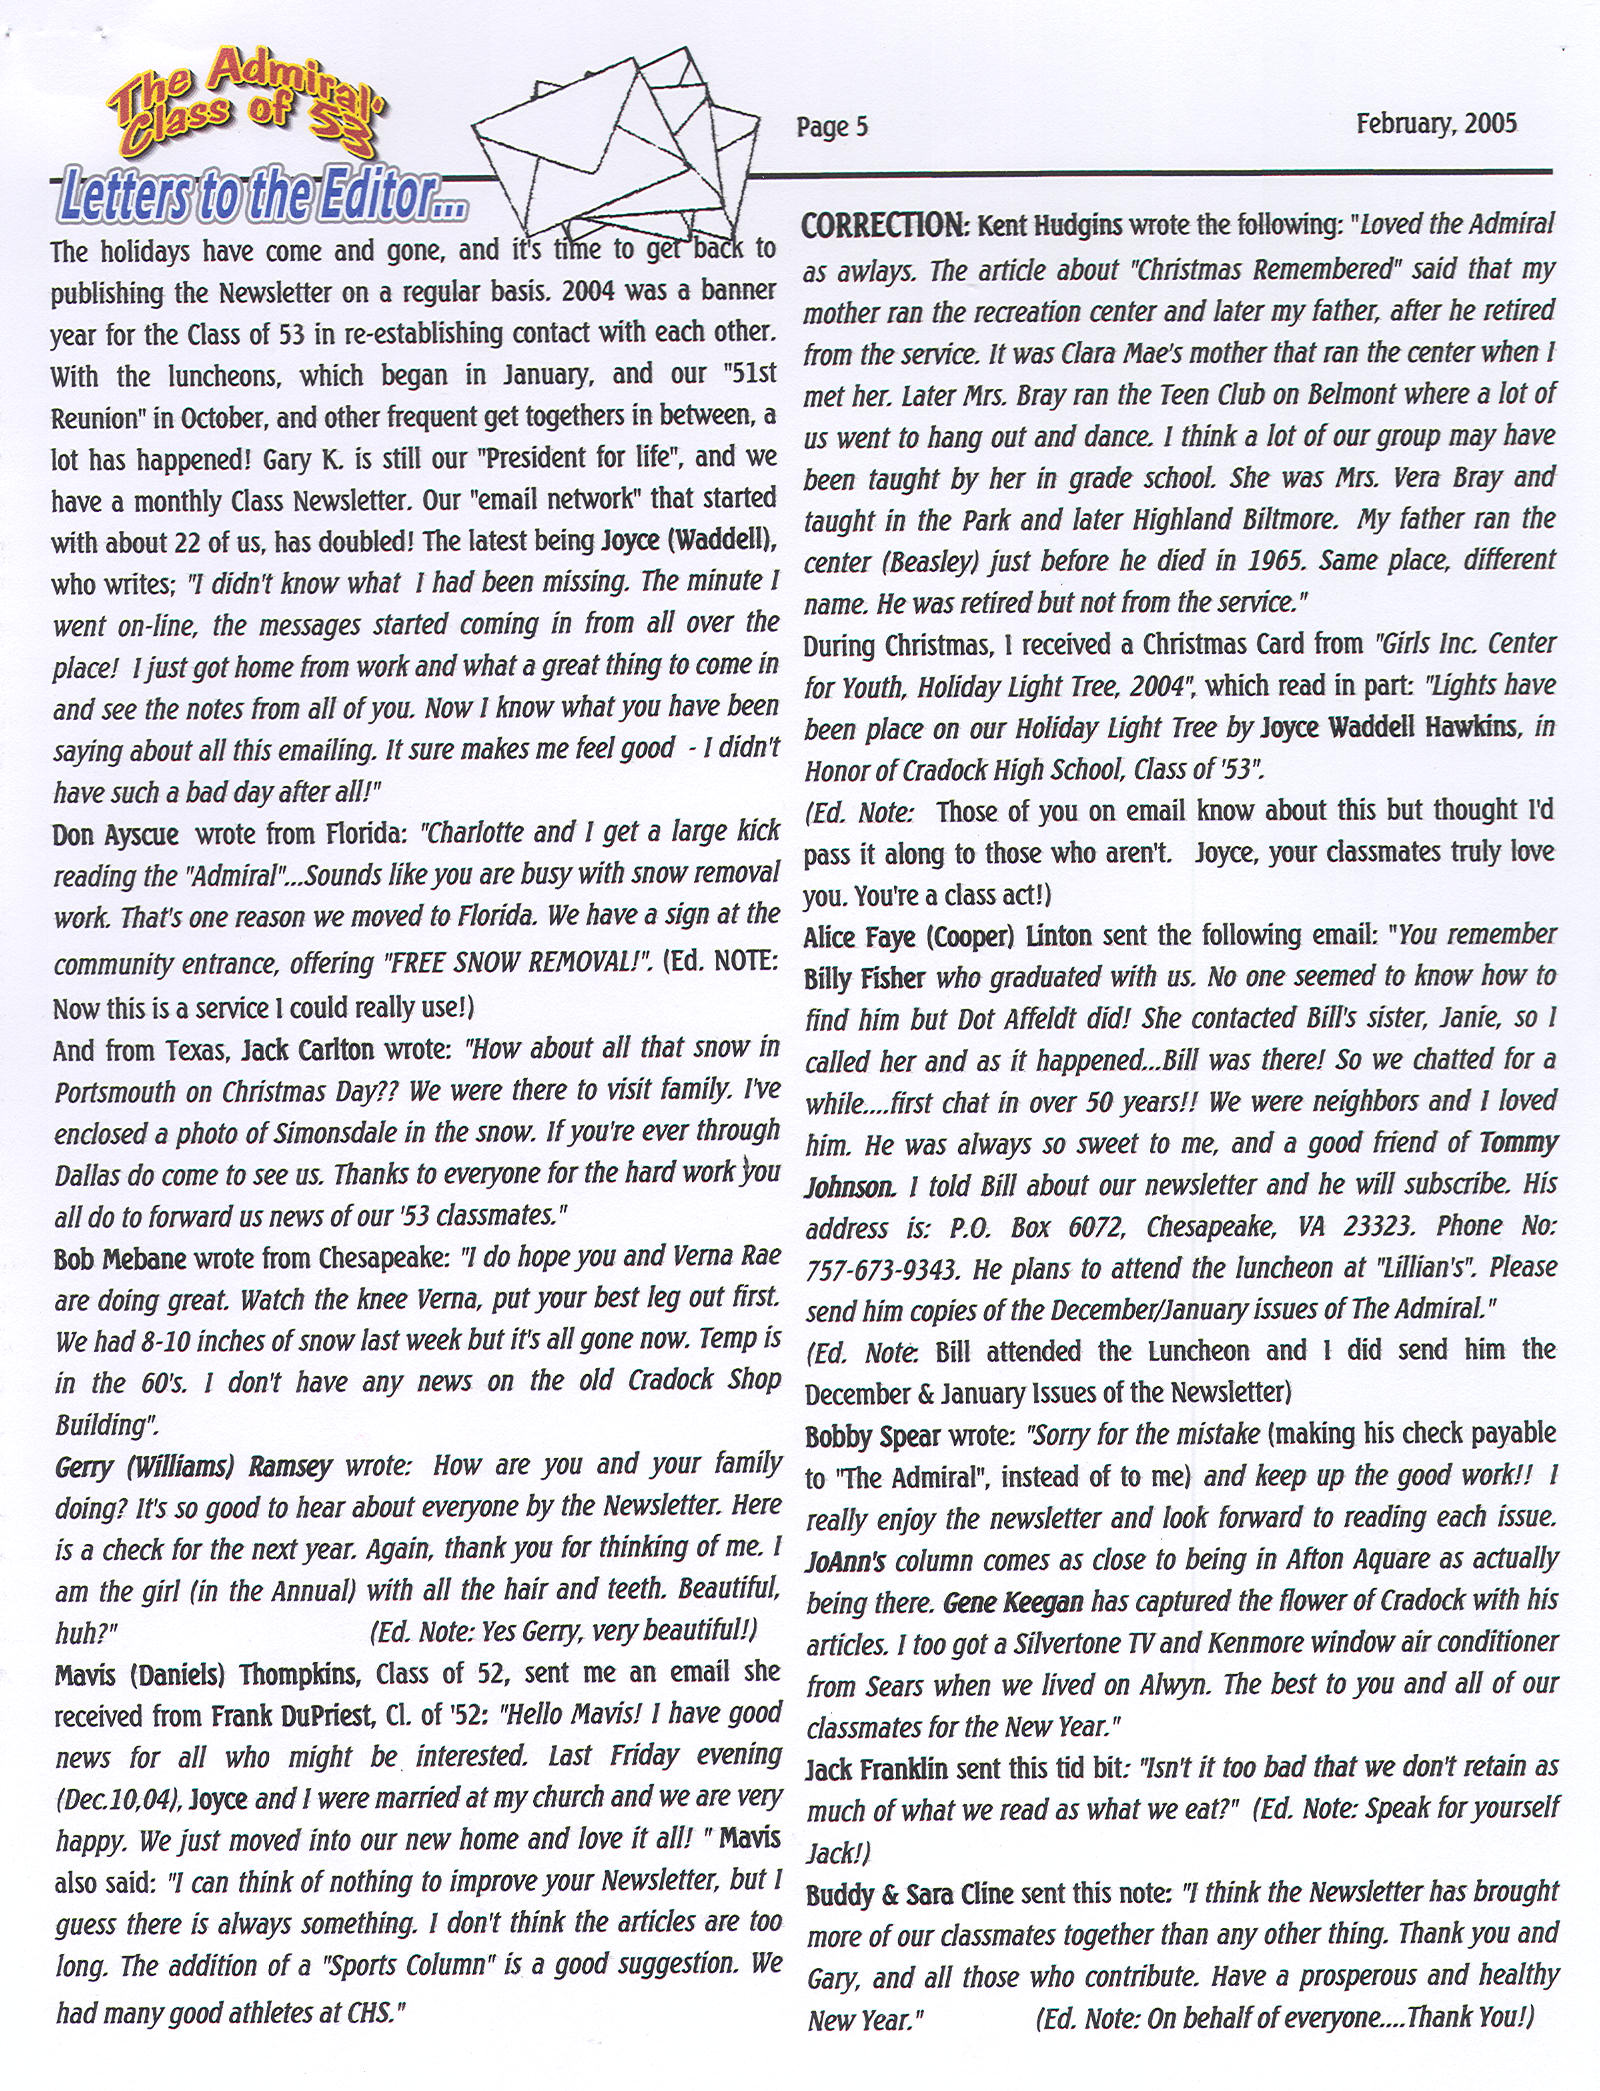 The Admiral - Feb. 2005 - pg. 5